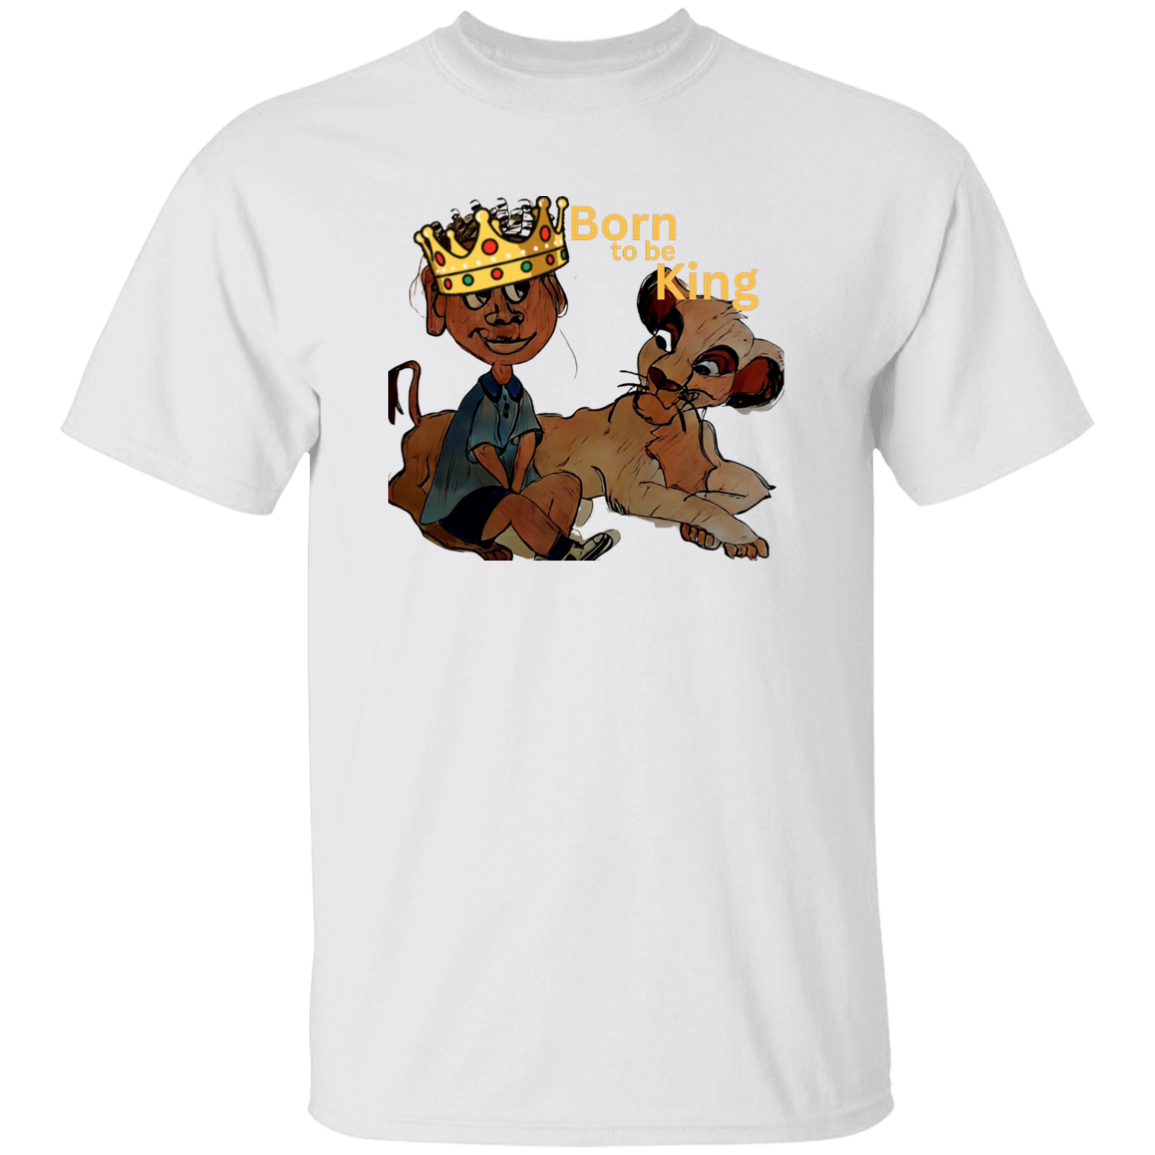 Born to be King Youth 5.3 oz 100% Cotton T-Shirt